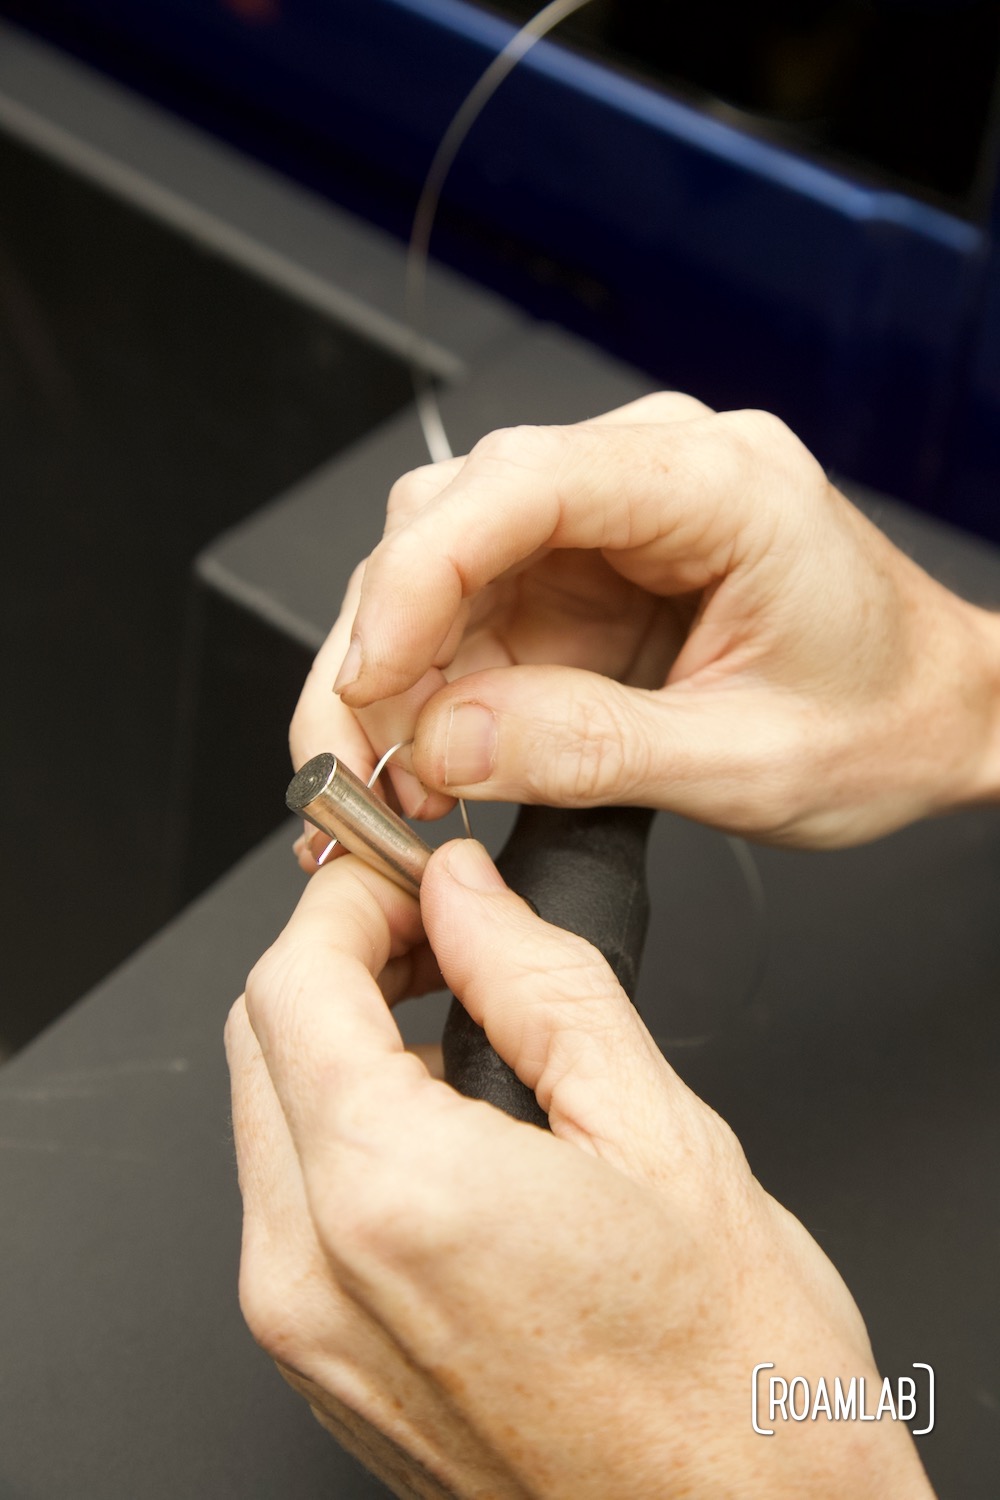 Hands pushing the cutting wire end through the tip of the gripping handle shaft to secure it in place.